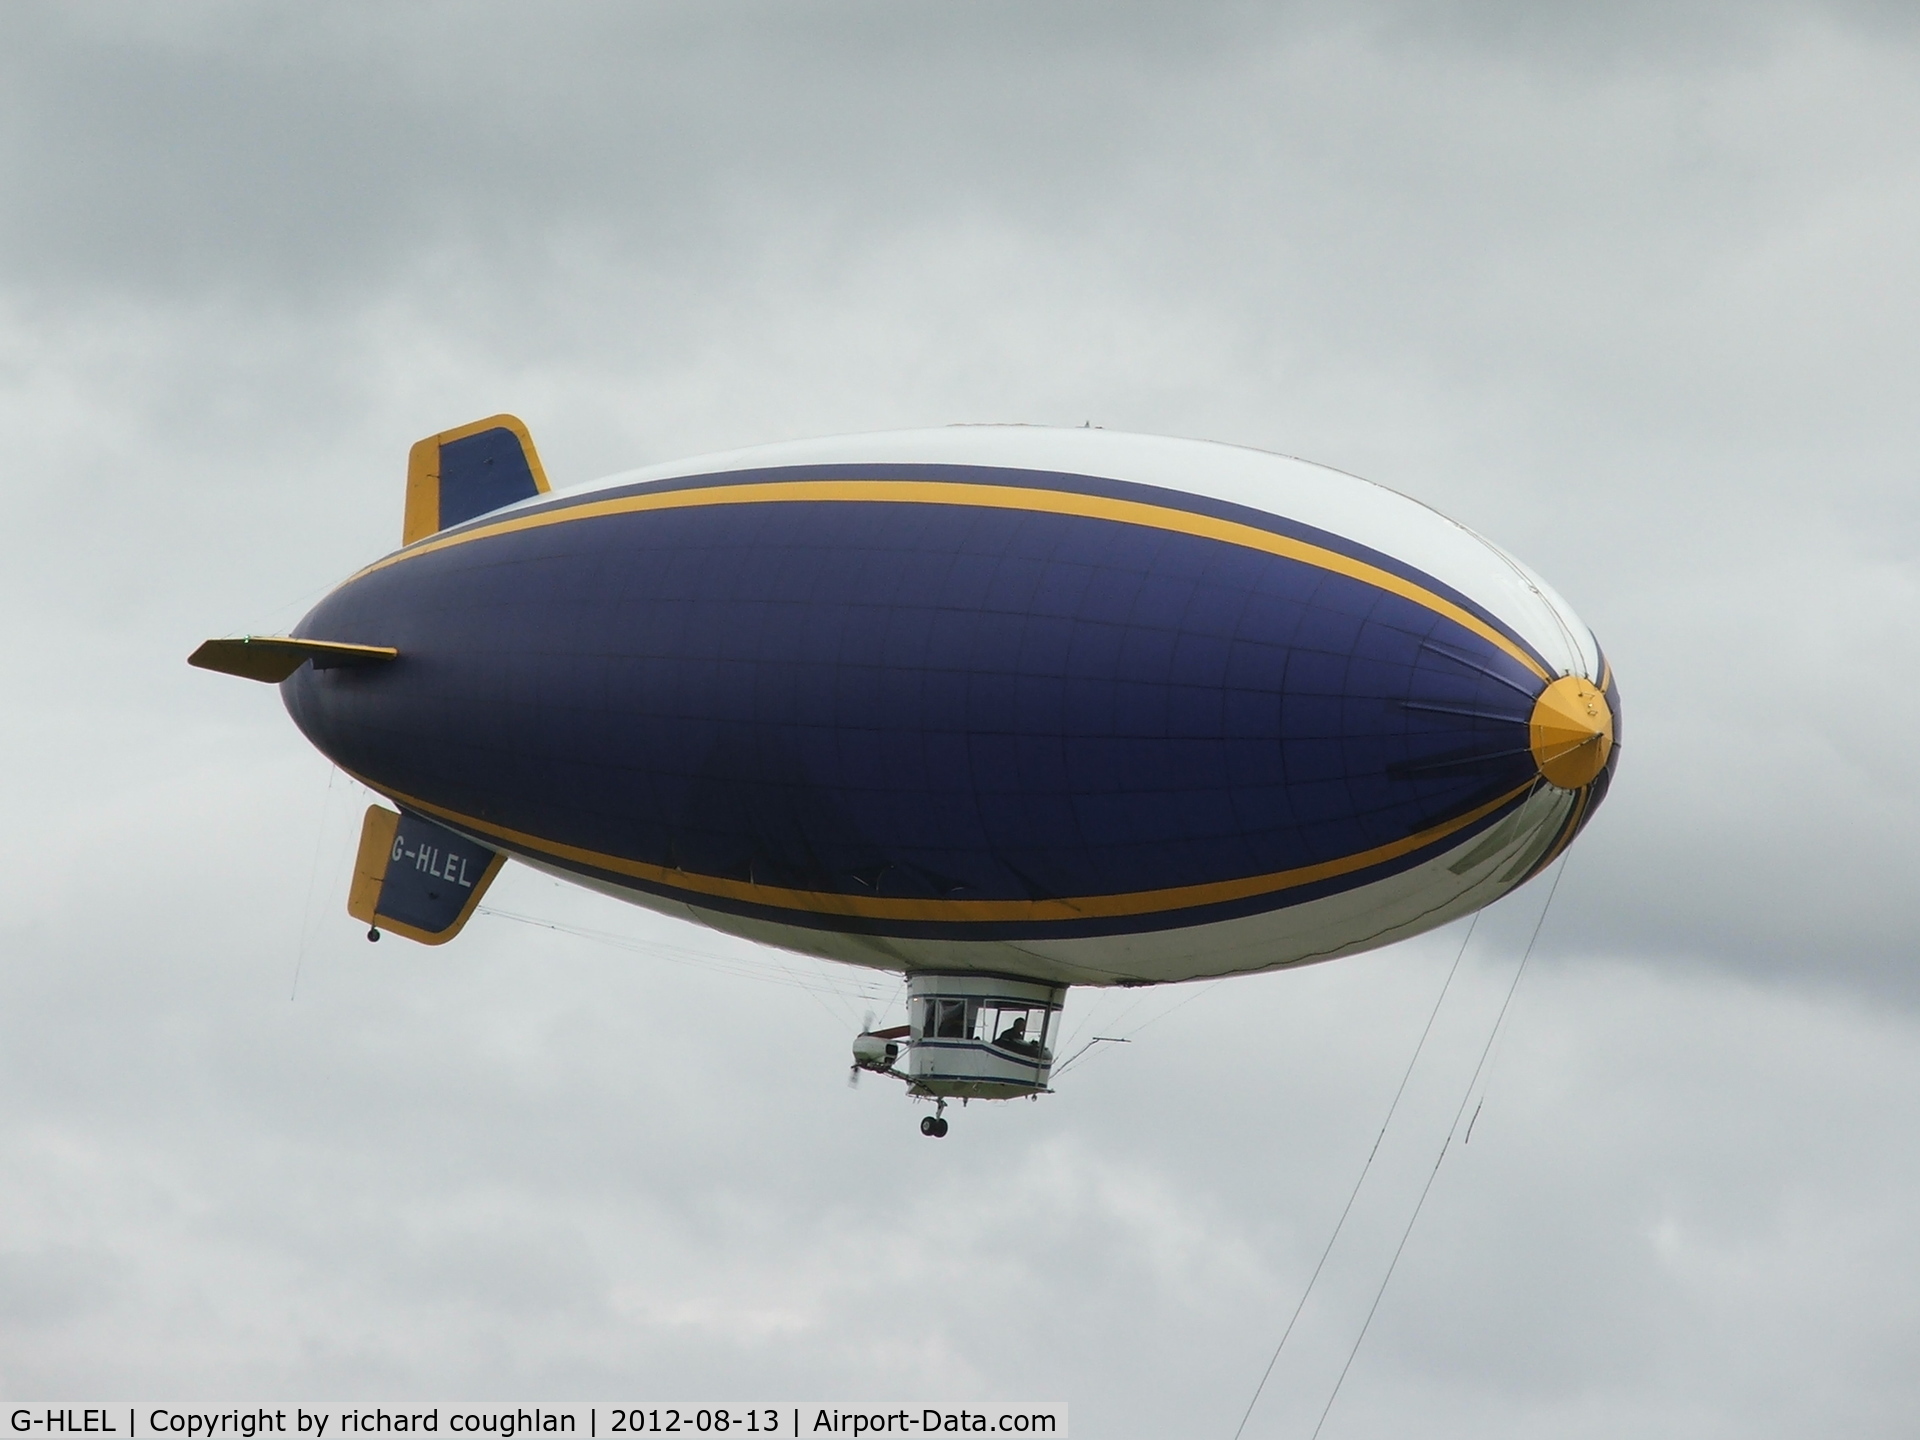 G-HLEL, 1995 American Blimp Corp A-60+ C/N 10, at Cardington hangers without Goodyear branding yesterday